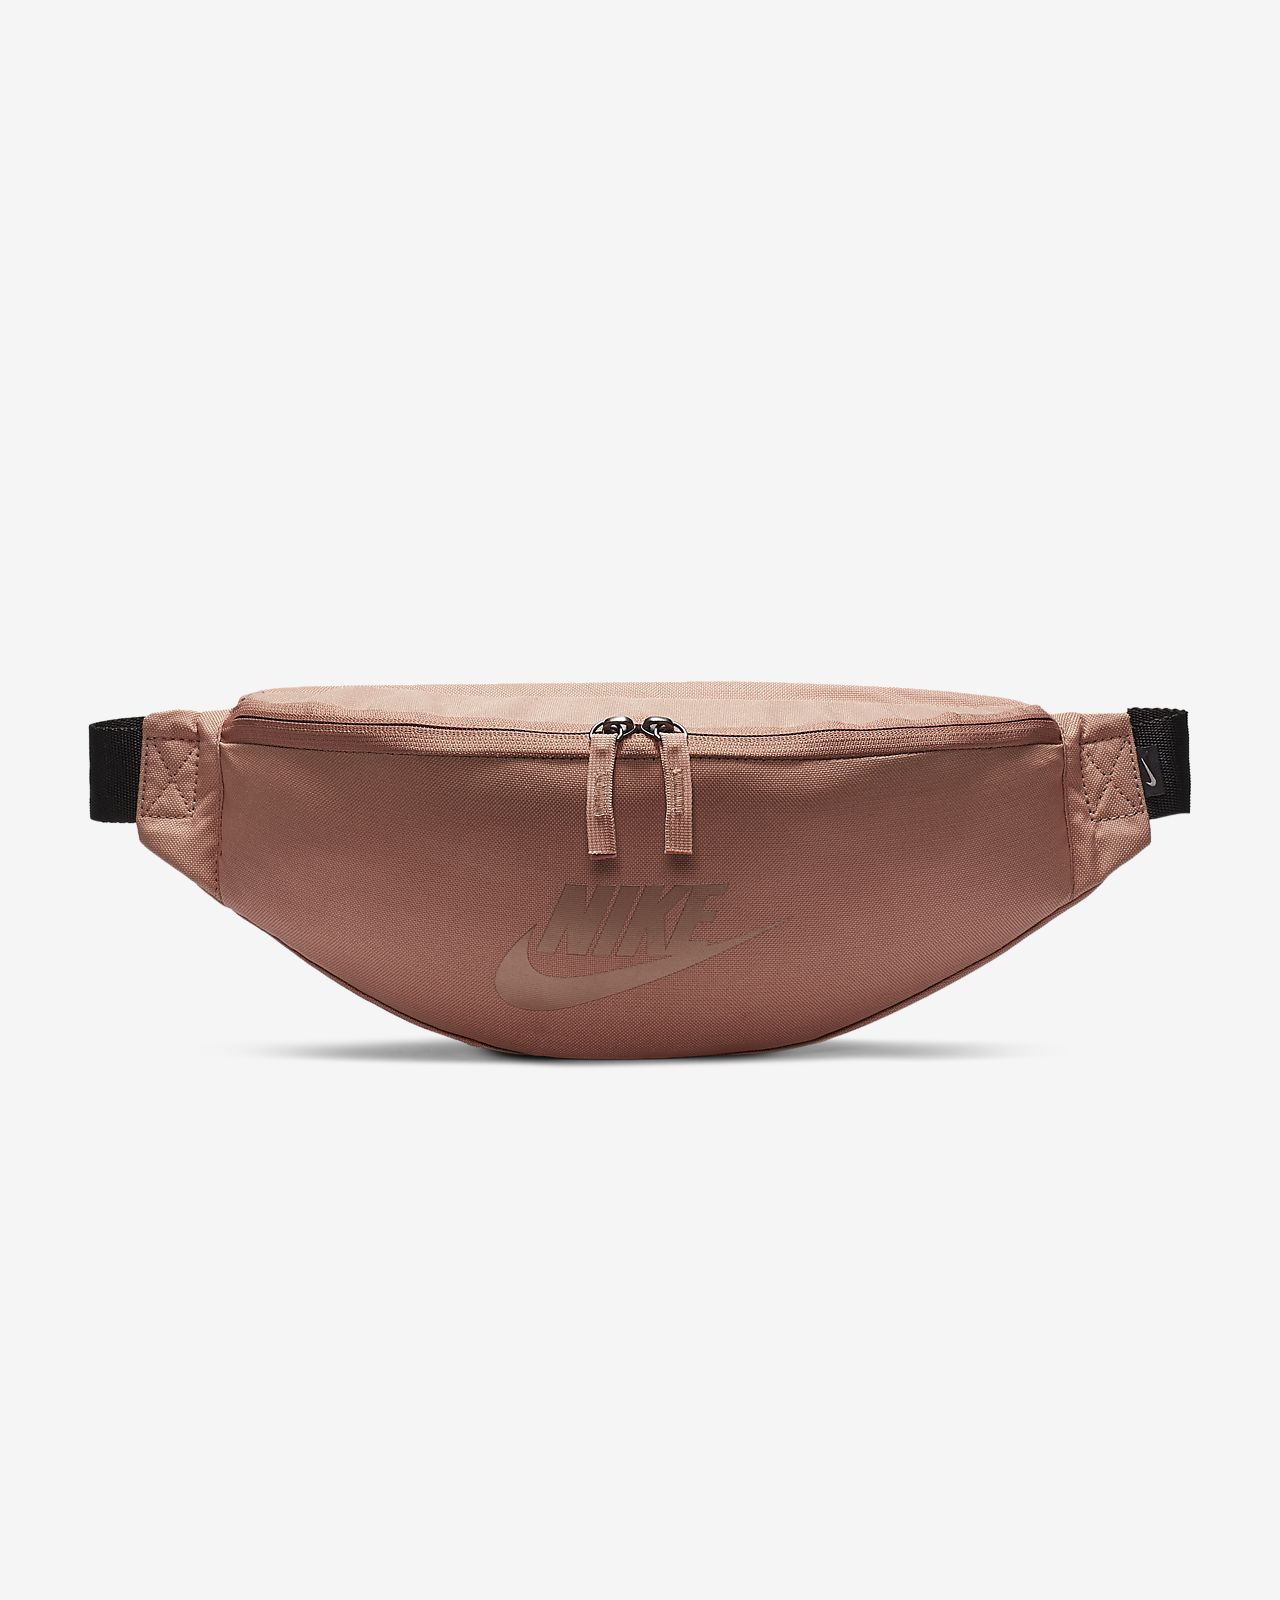 gold nike fanny pack